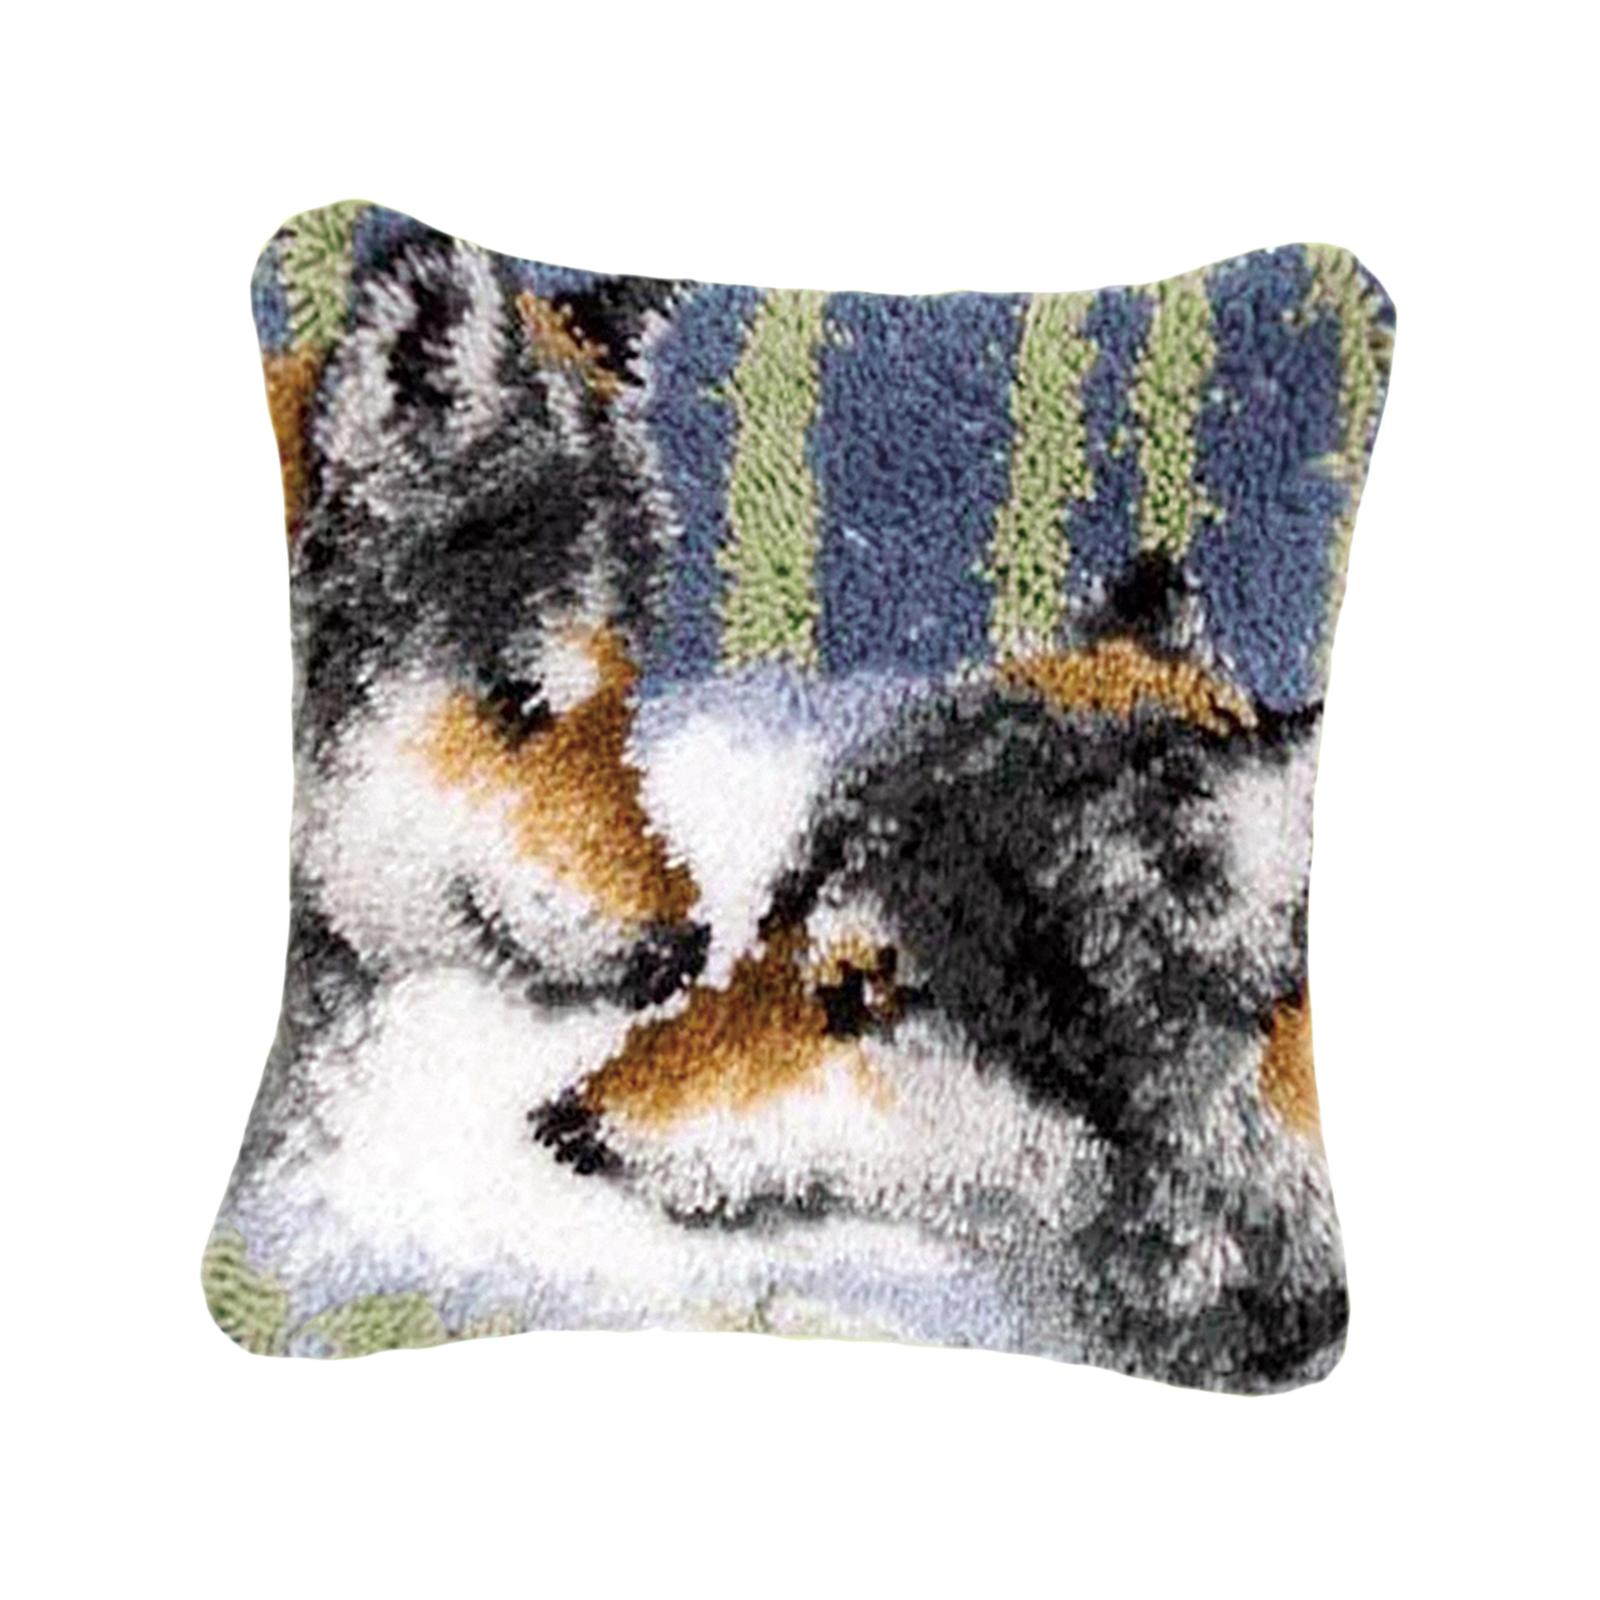 Latch Hook s DIY Throw Pillow Case Sofa Cushion Cover, Cute Animal Pattern  Needlework Cushion Cover Hand Craft Crochet for Great Family - Wolf 